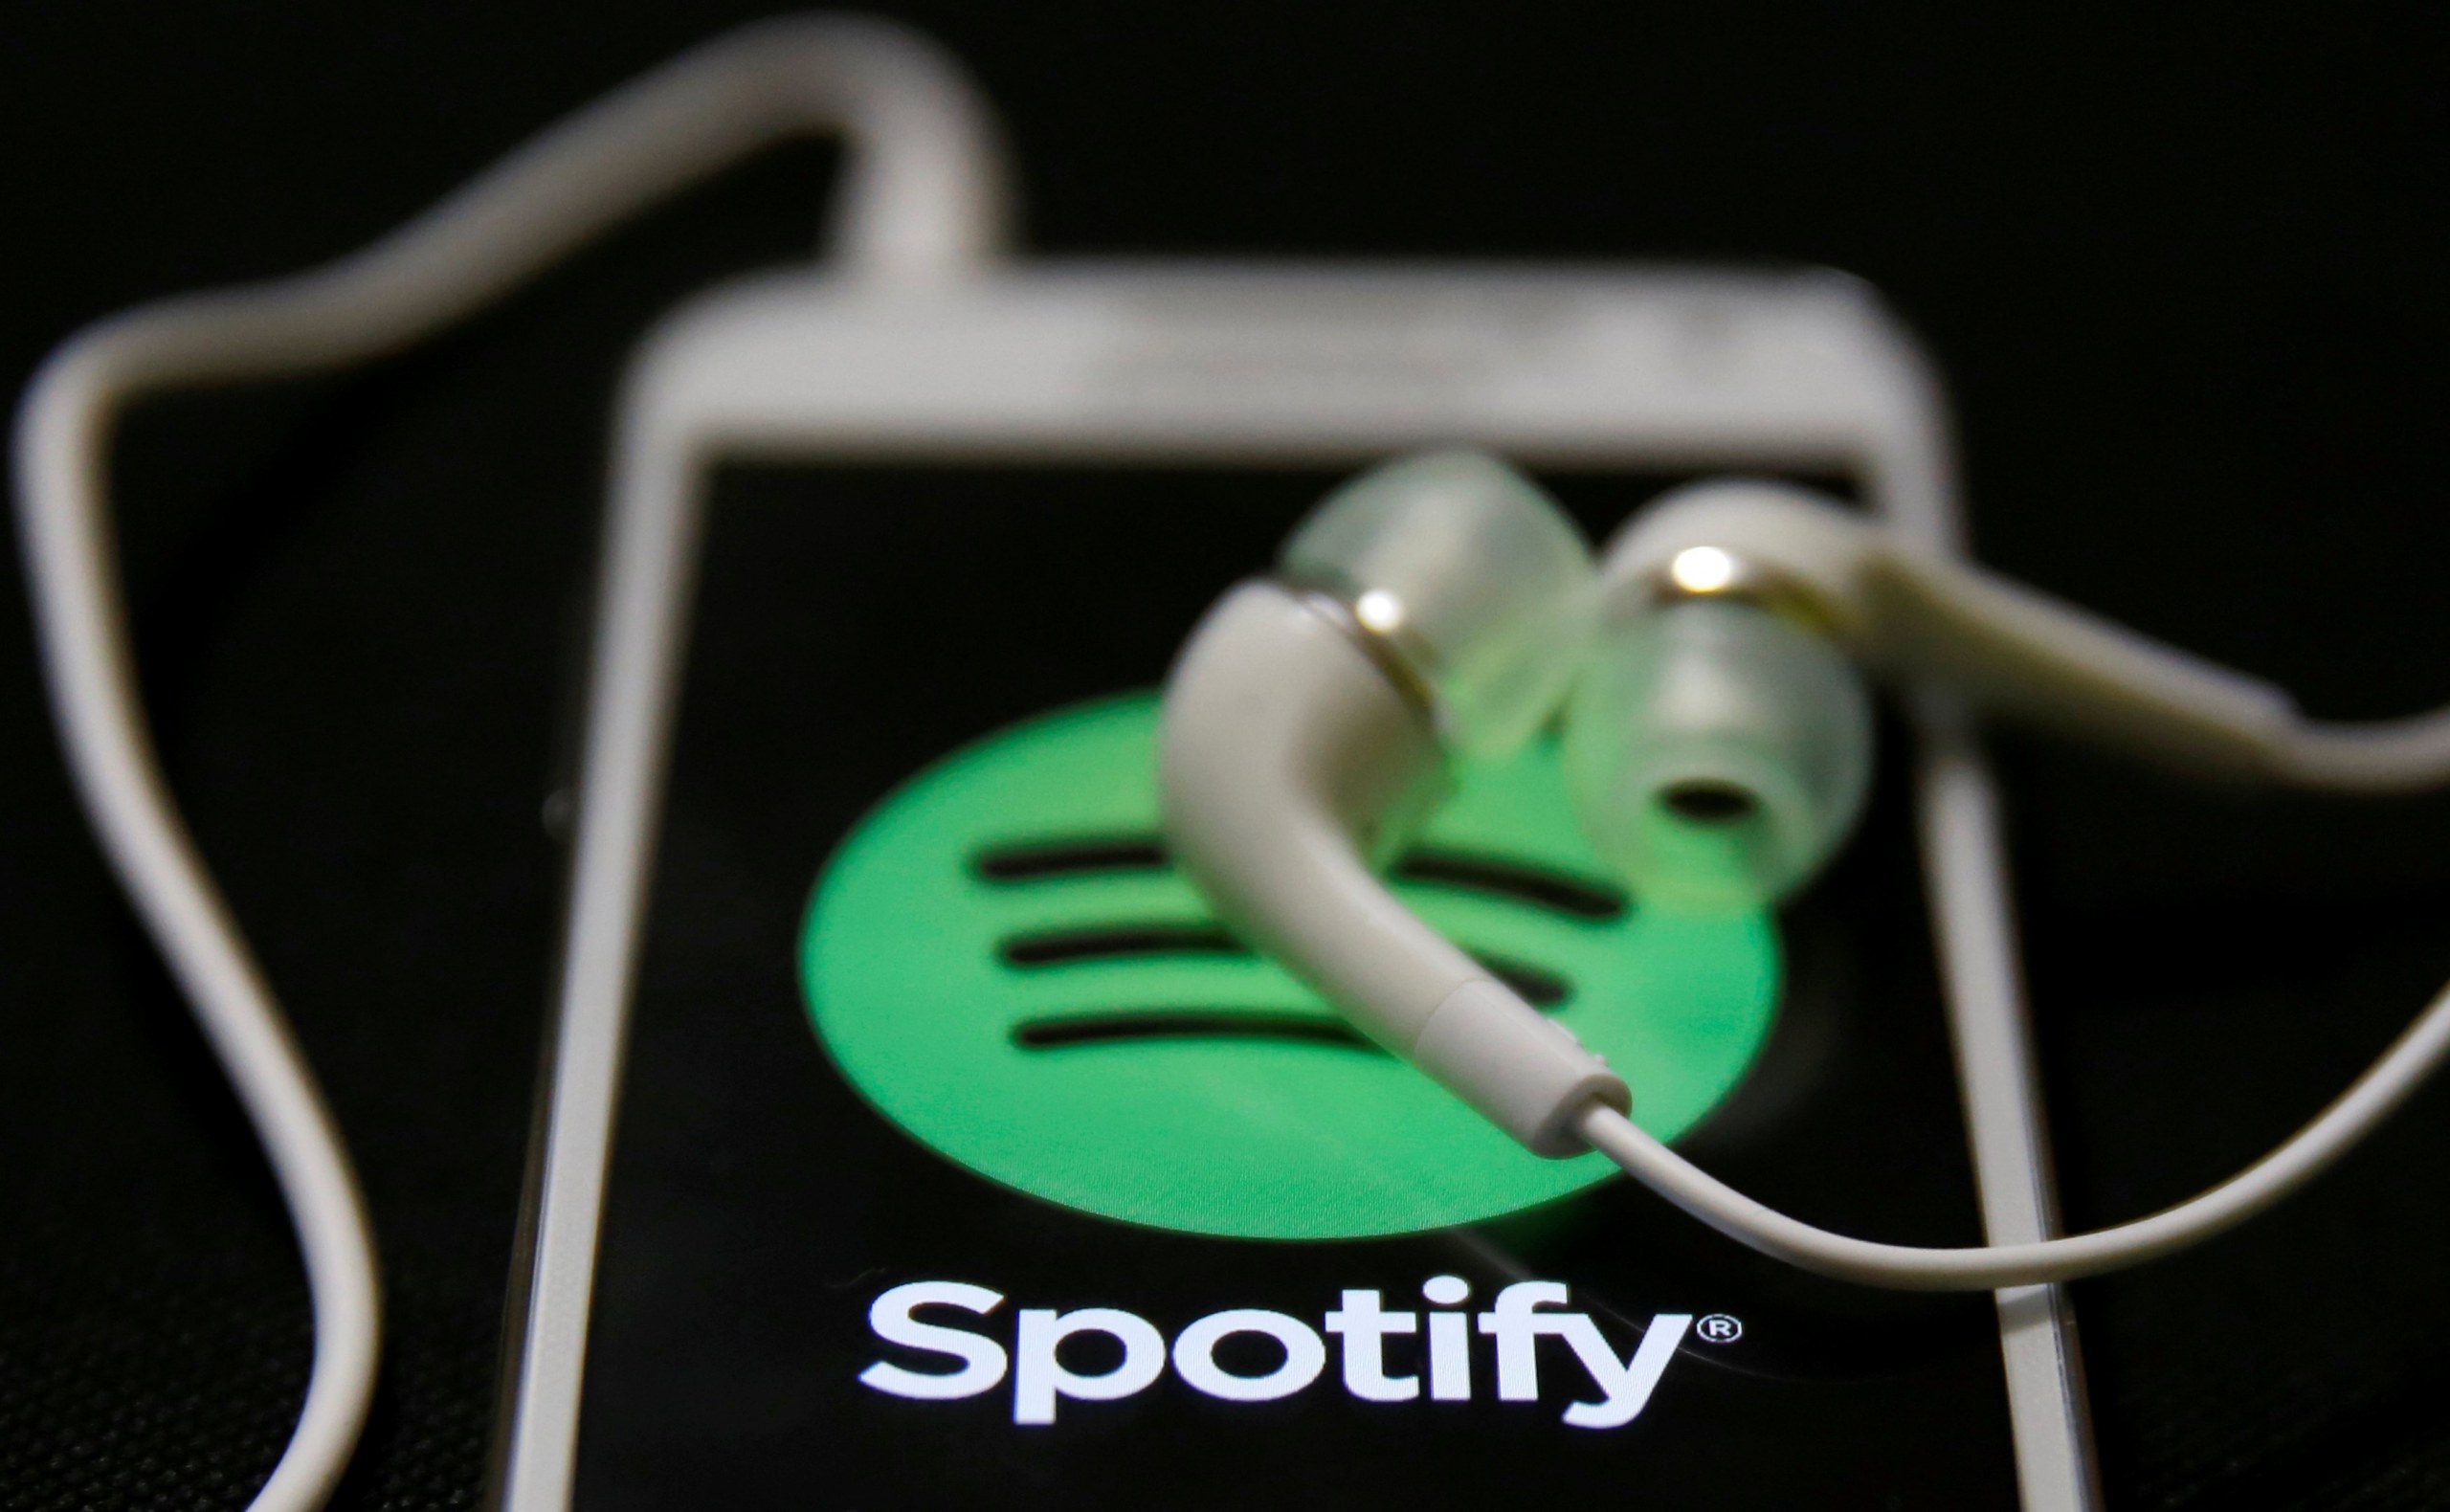 Warner Music Group asks India to bar Spotify from playing its music